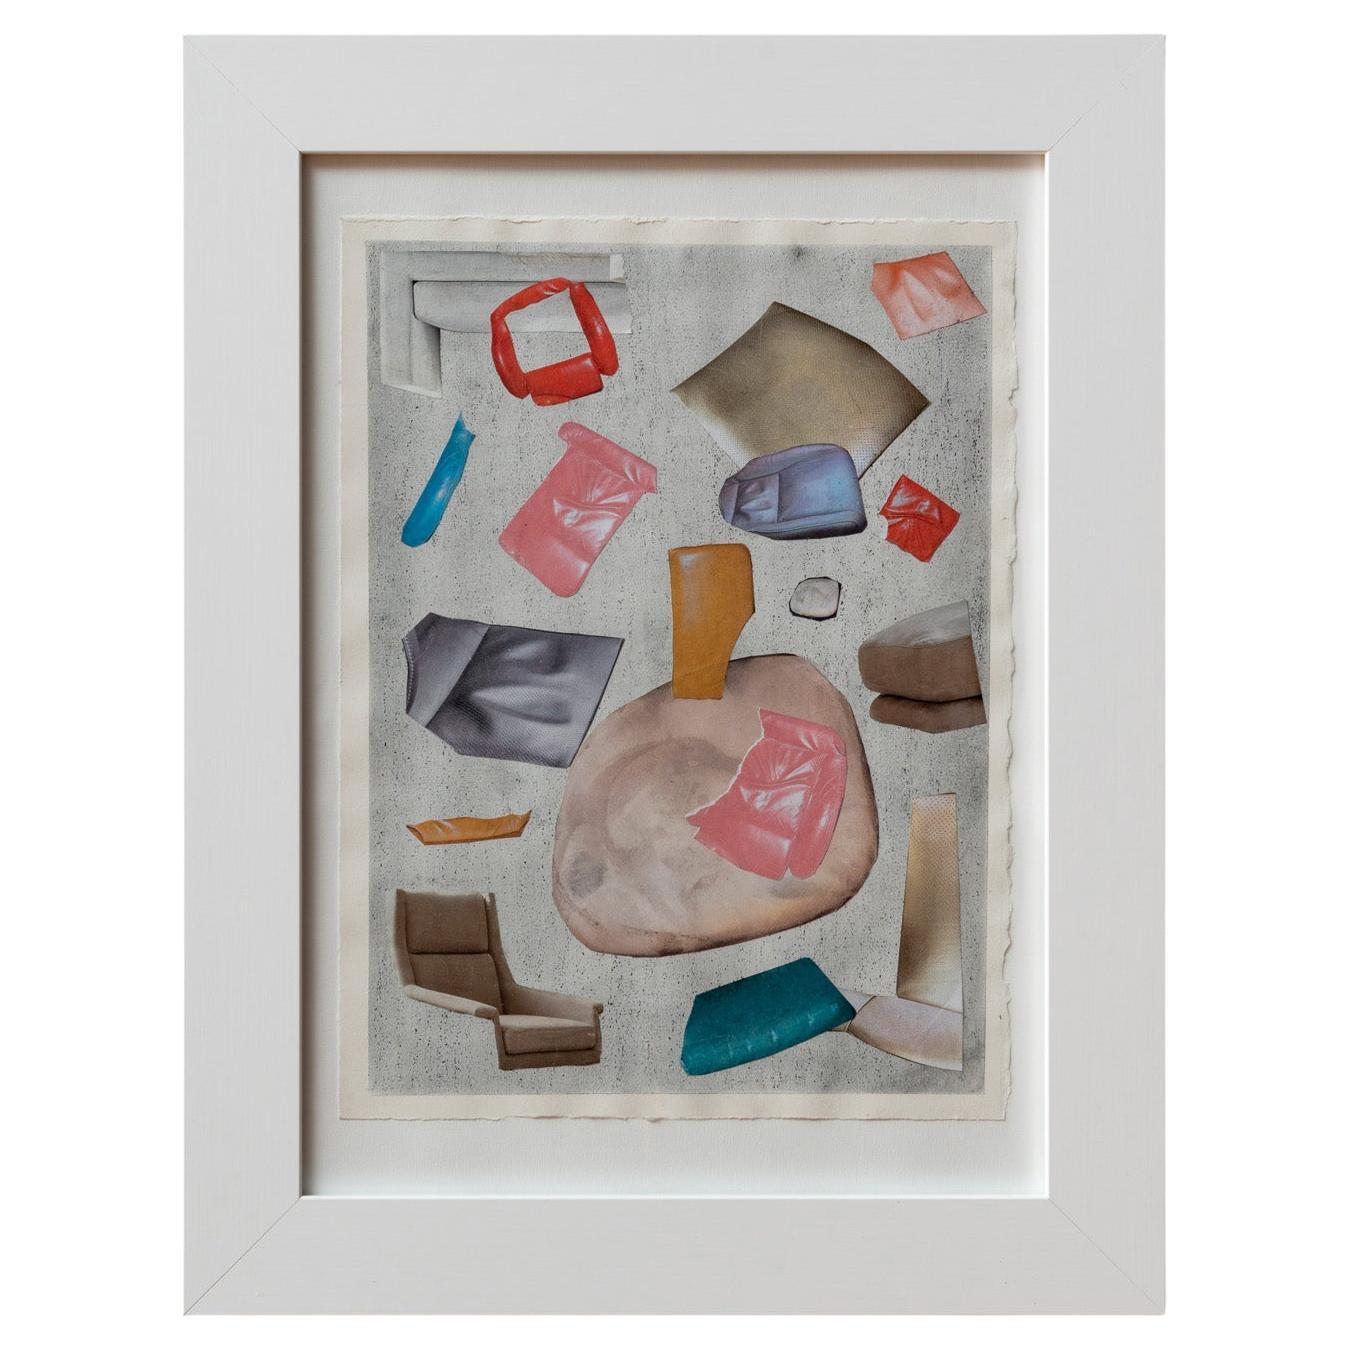 Framed Contemporary Mixed Media Collage on Paper, Ilana Harris-Babou 'Imprint I'